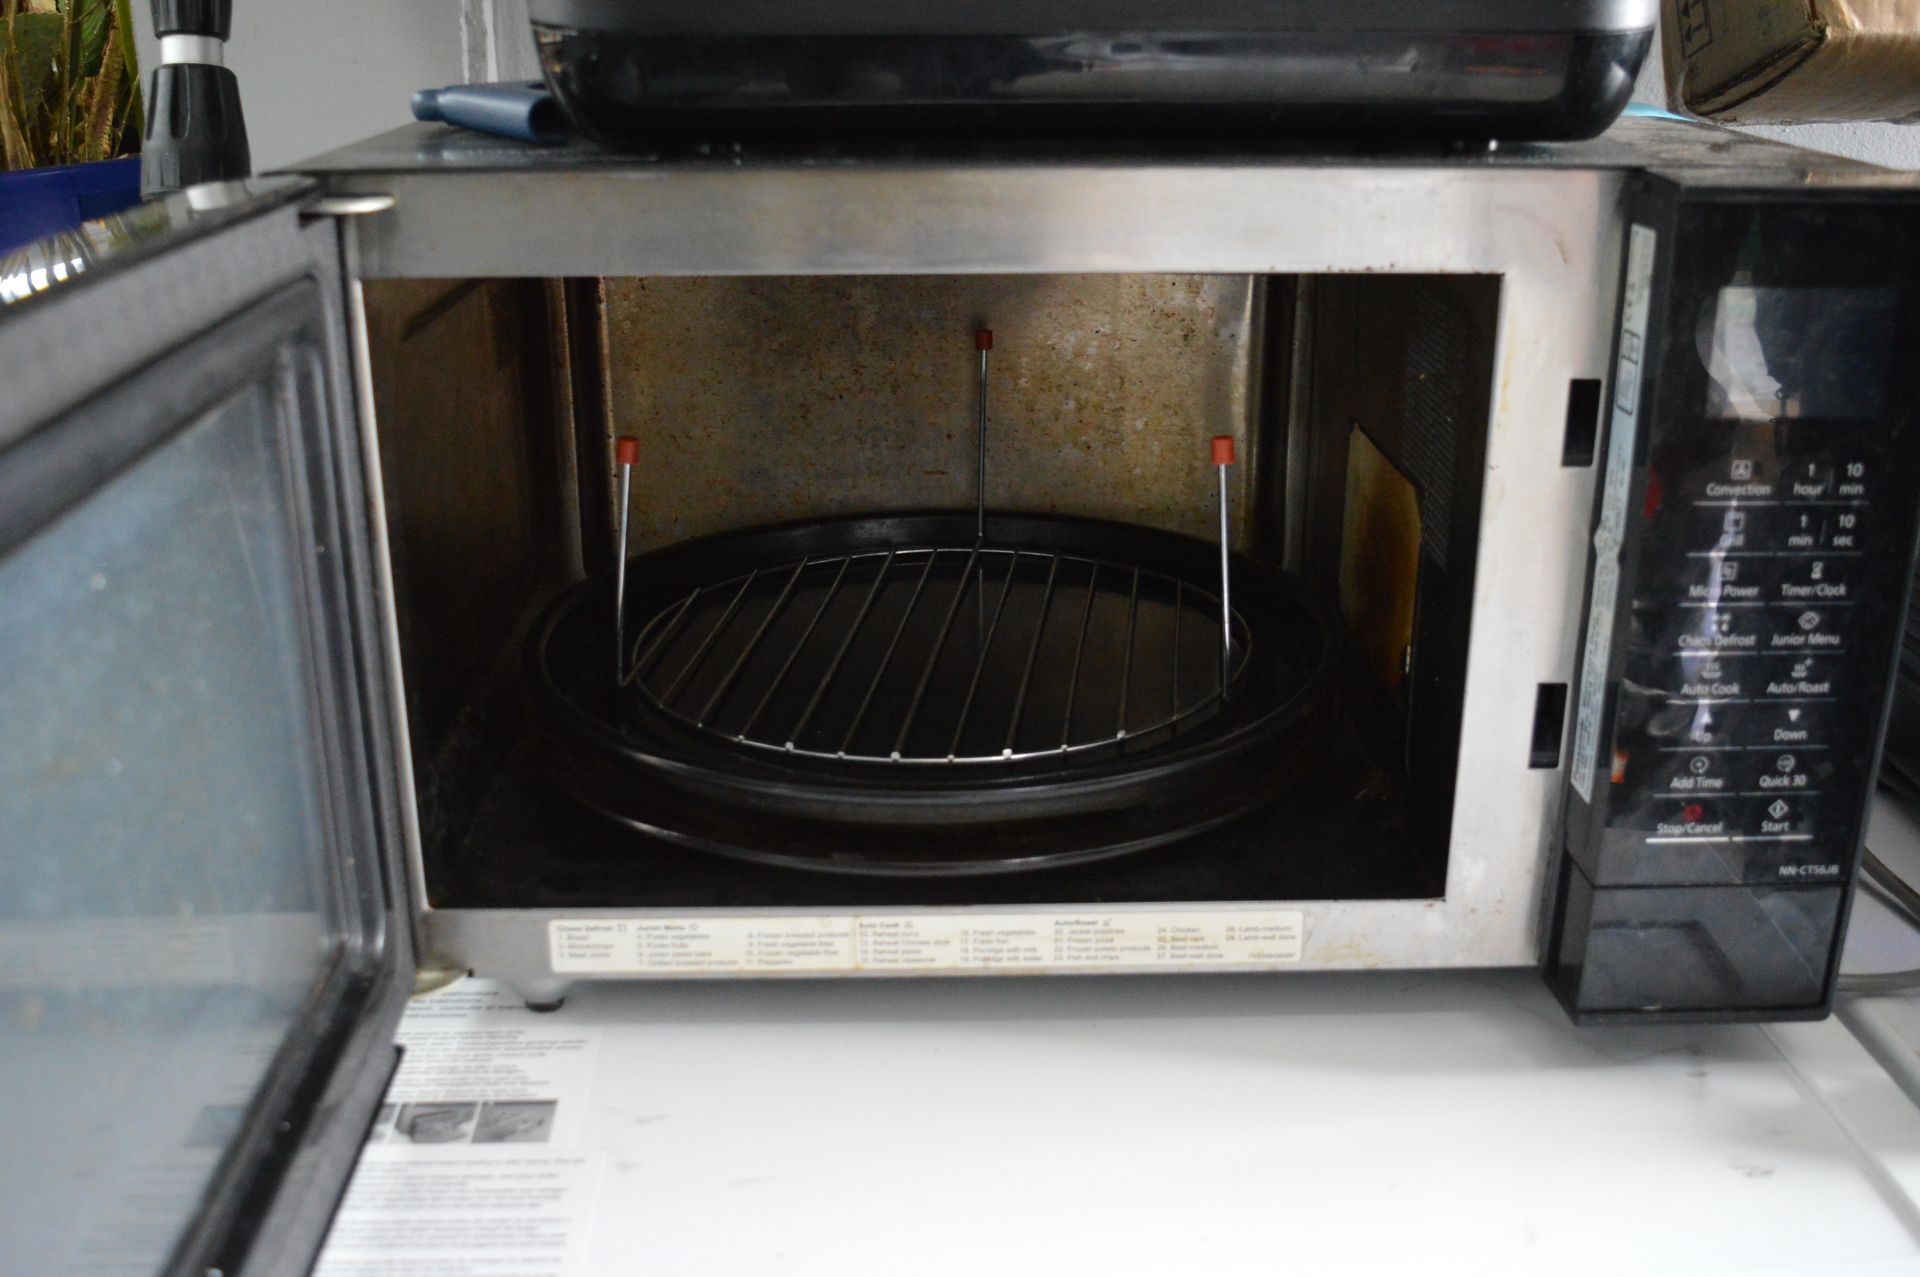 *Panasonic Invertor Microwave Oven & Grill - Image 2 of 2